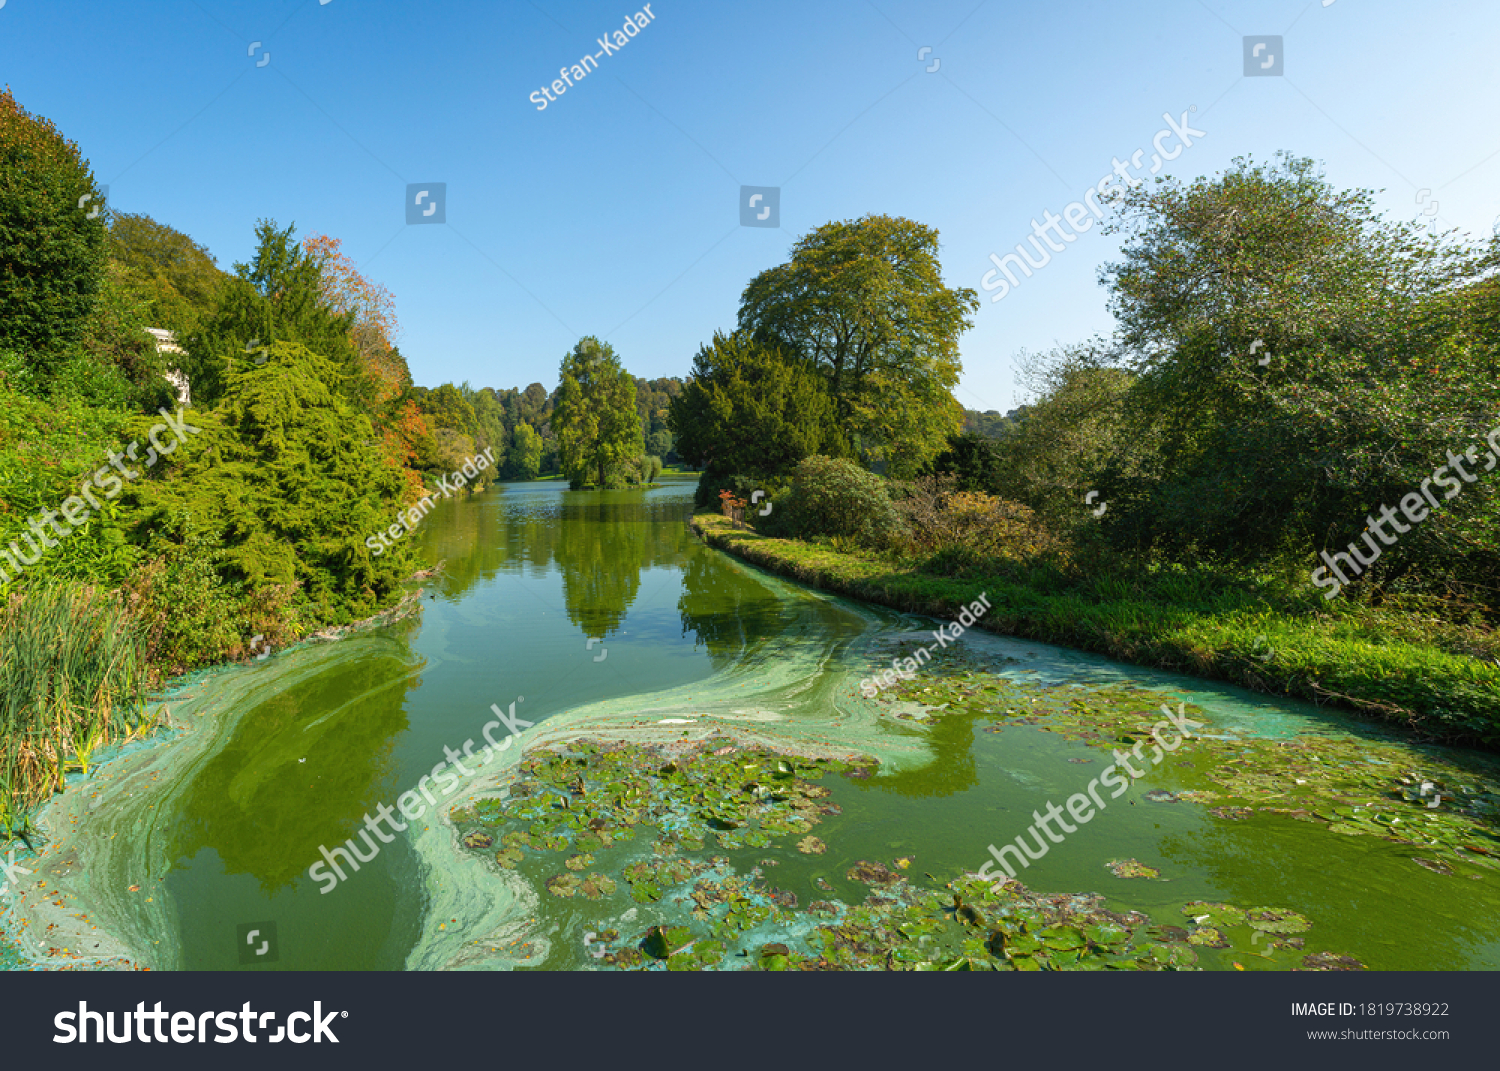 Swirling green and blue algae (Cyanobacteria) on a lake filled with thick green water surrounded by trees on a clear blue sky #1819738922